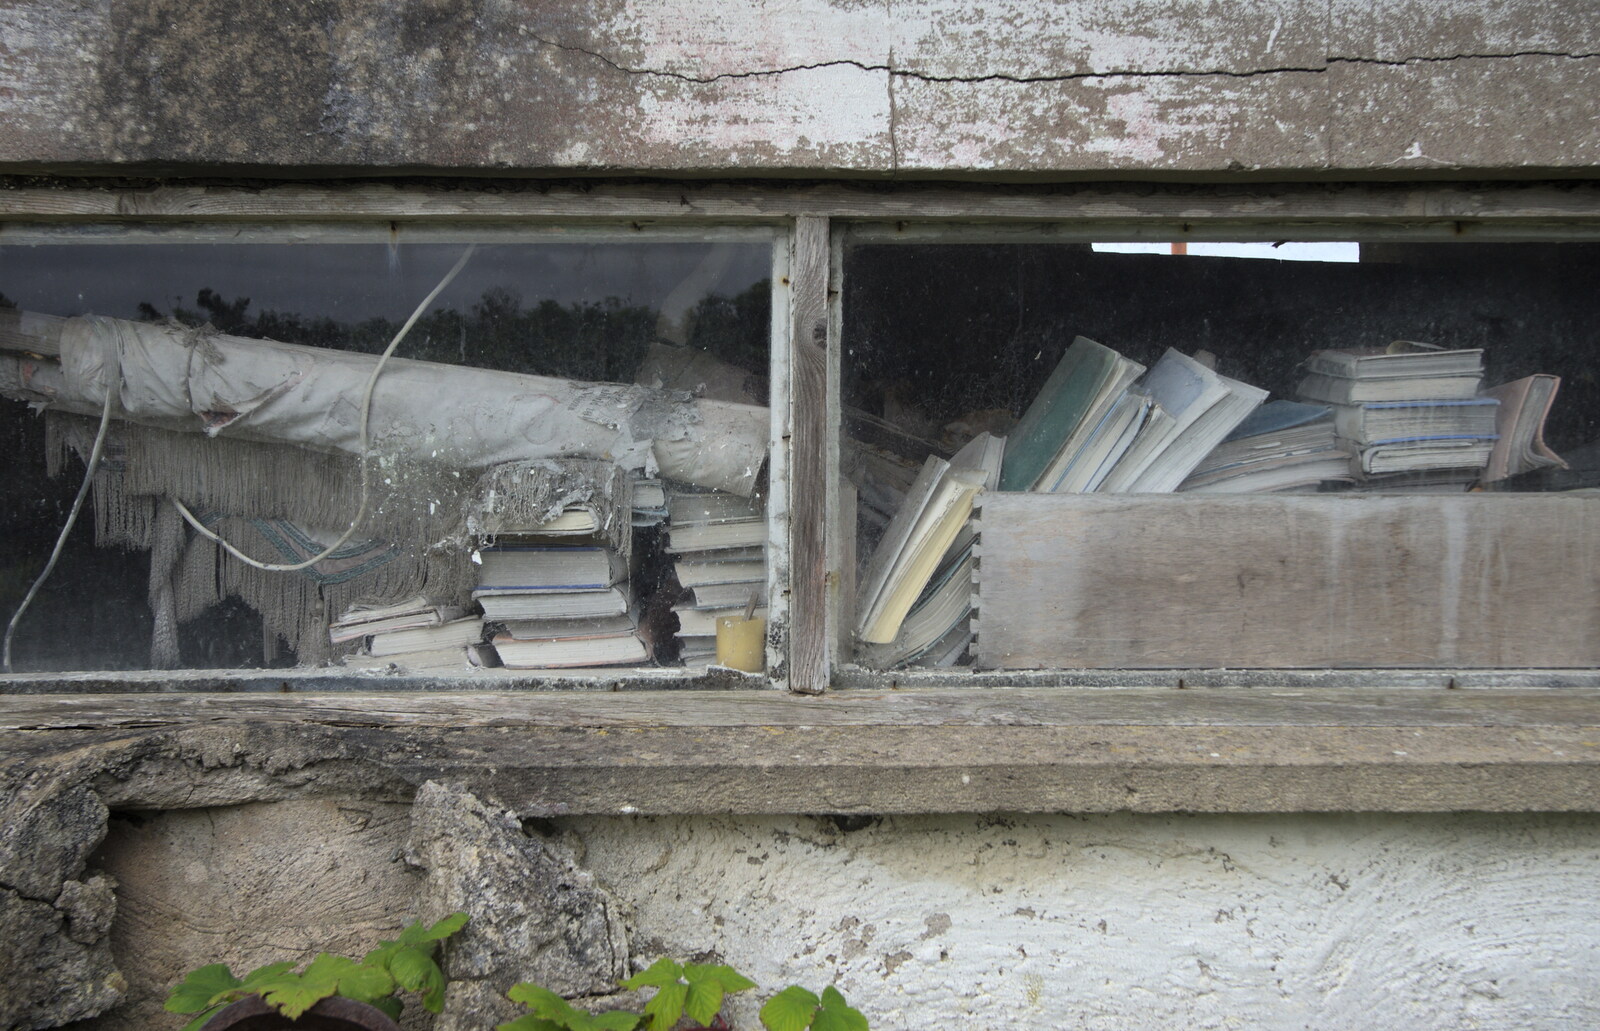 A heap of discarded books adds to the poignancy from From Achill to Strokestown, Mayo and Roscommon, Ireland - 10th August 2017